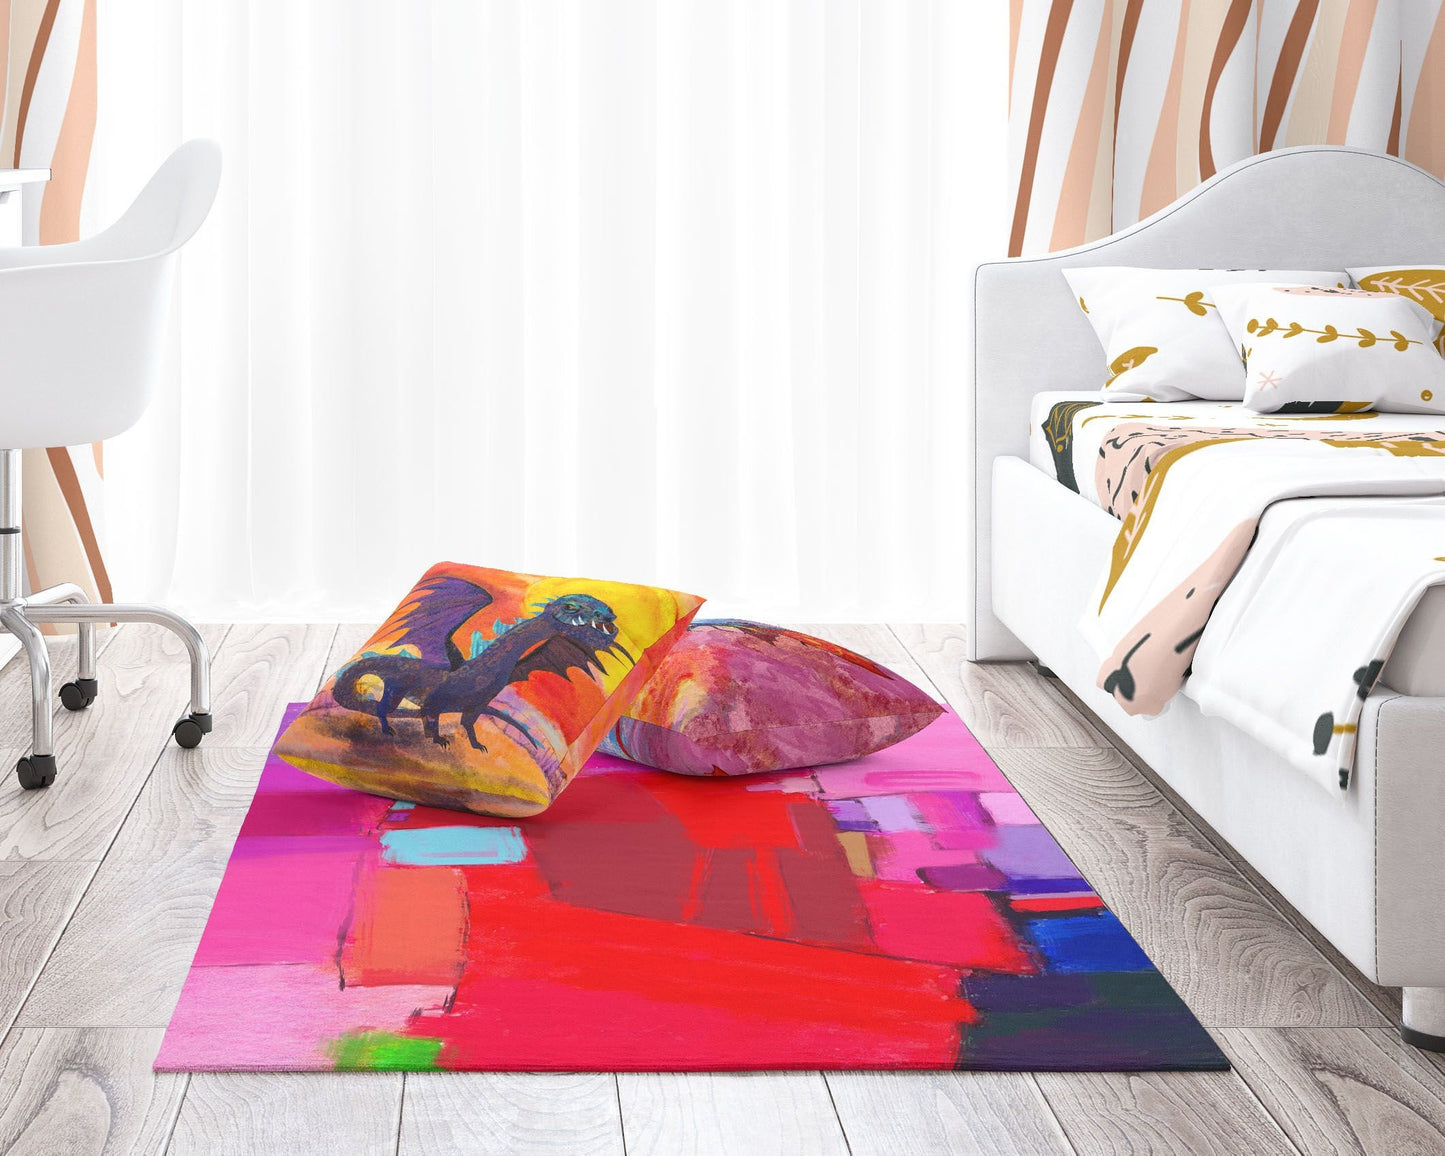 Red Carpet, Oversize Rug, Thick Carpet, Rectangle Rug, Colorful Rug, Abstract Rug, Modern Area Rug, Living Room Decor, Made In USA